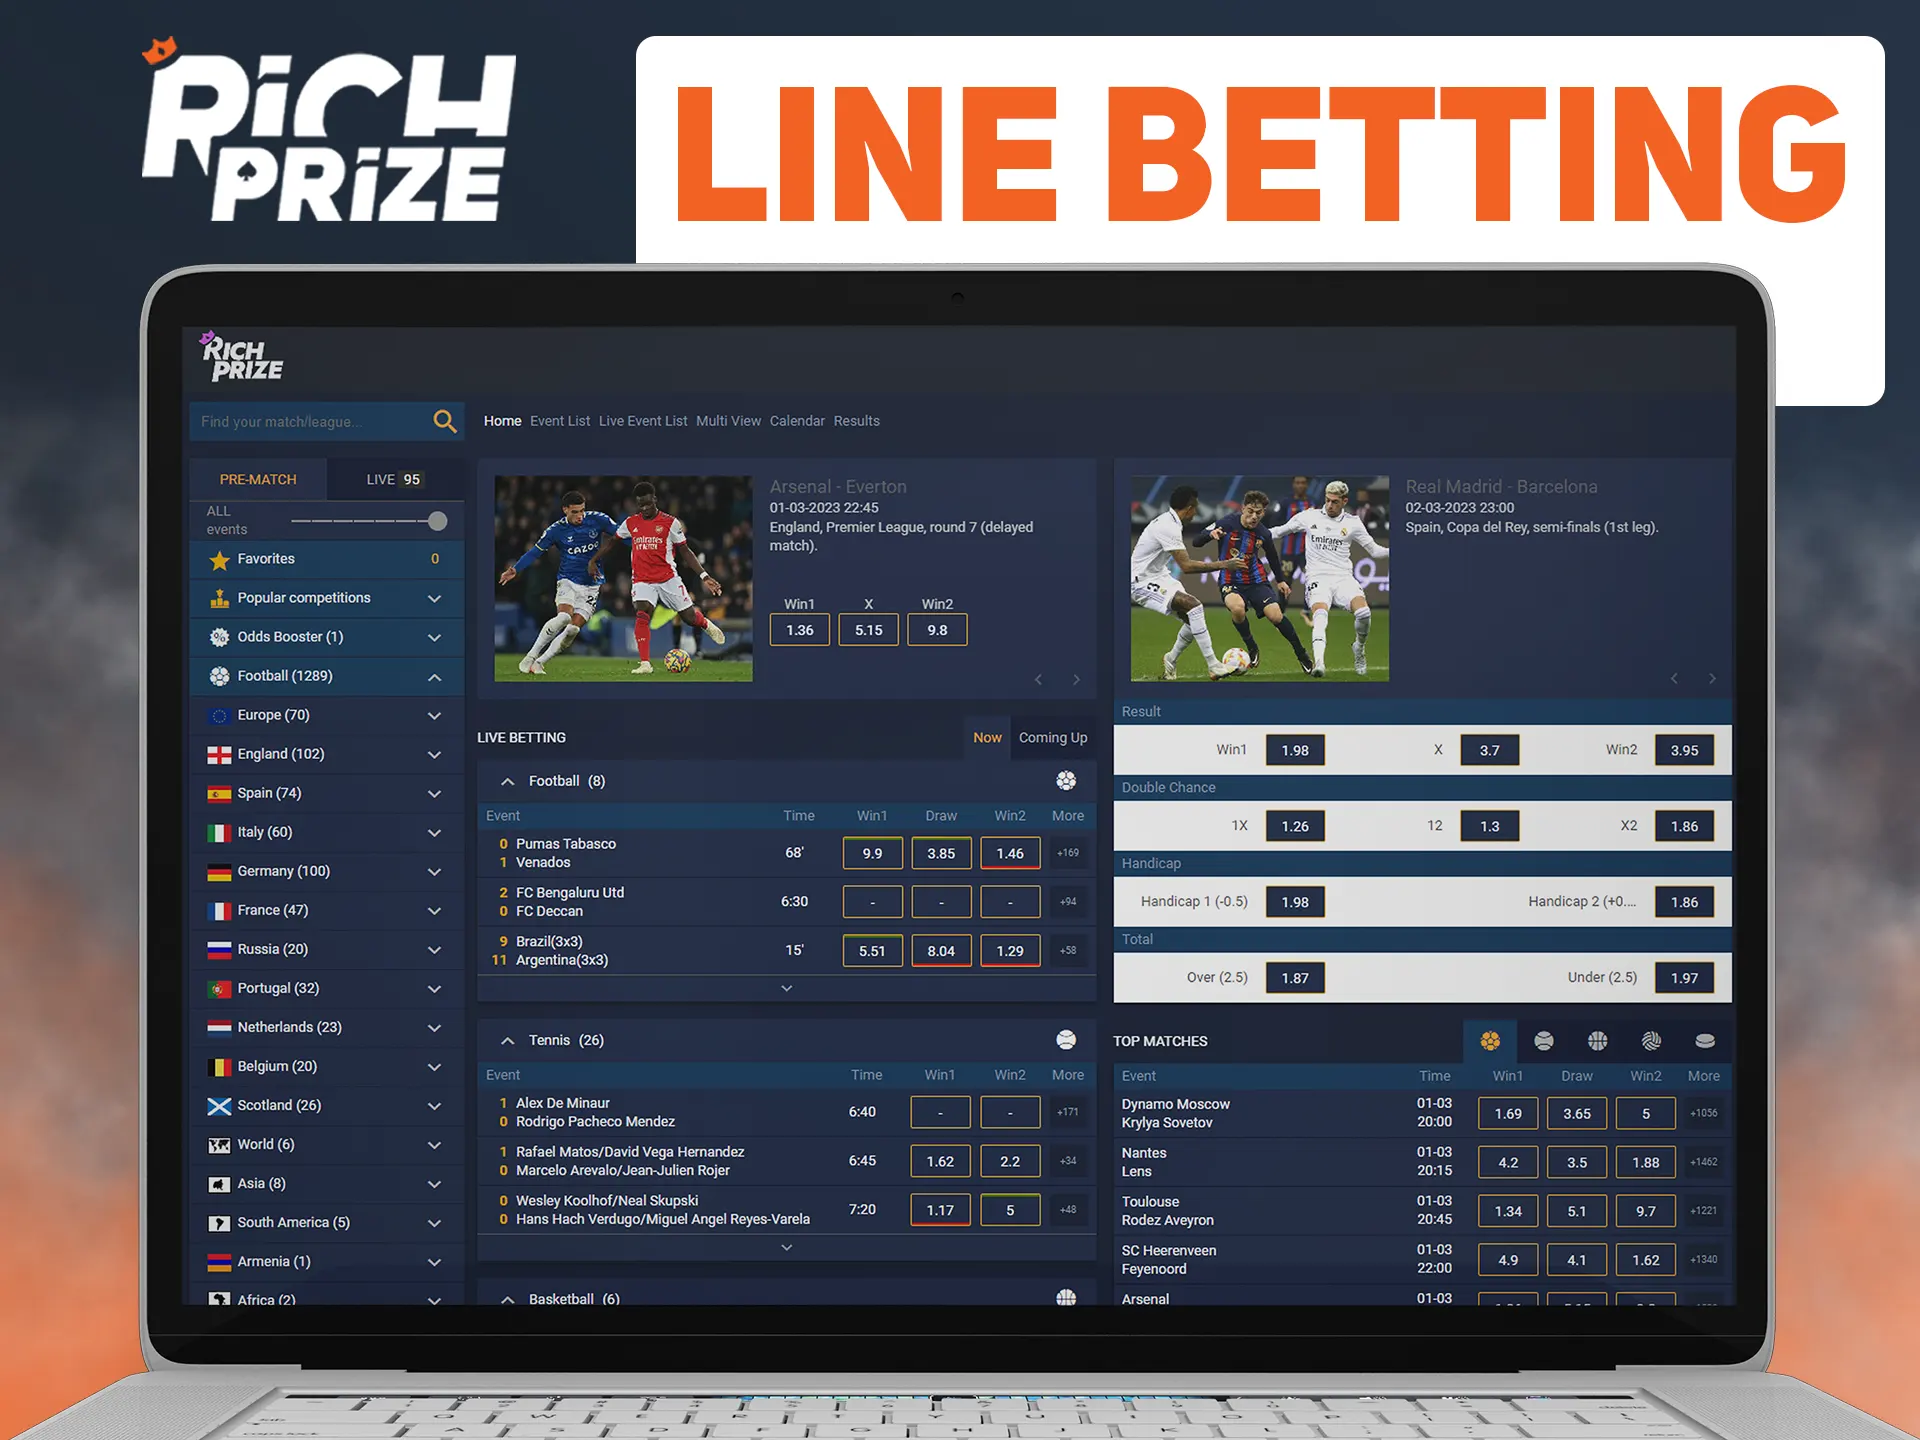 Make your bet at Richprize until game start.